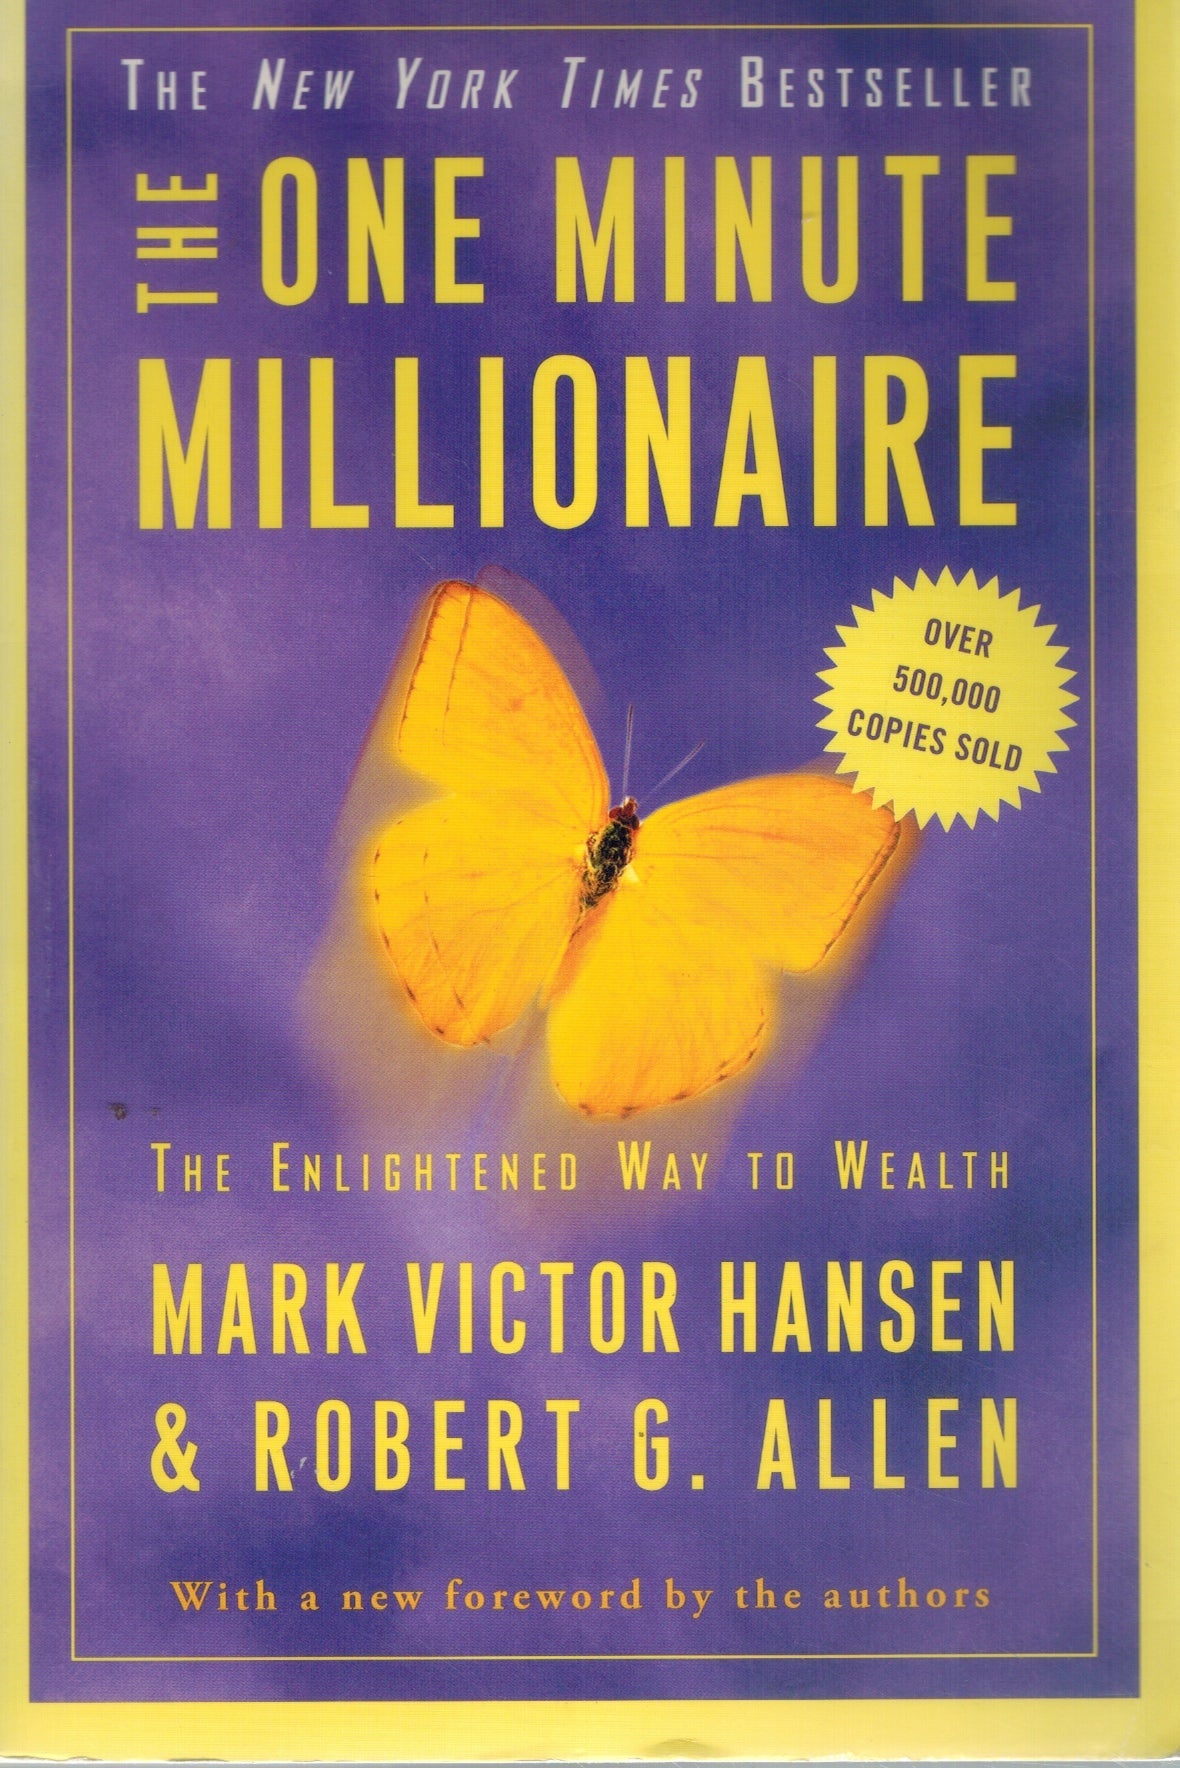 THE ONE MINUTE MILLIONAIRE